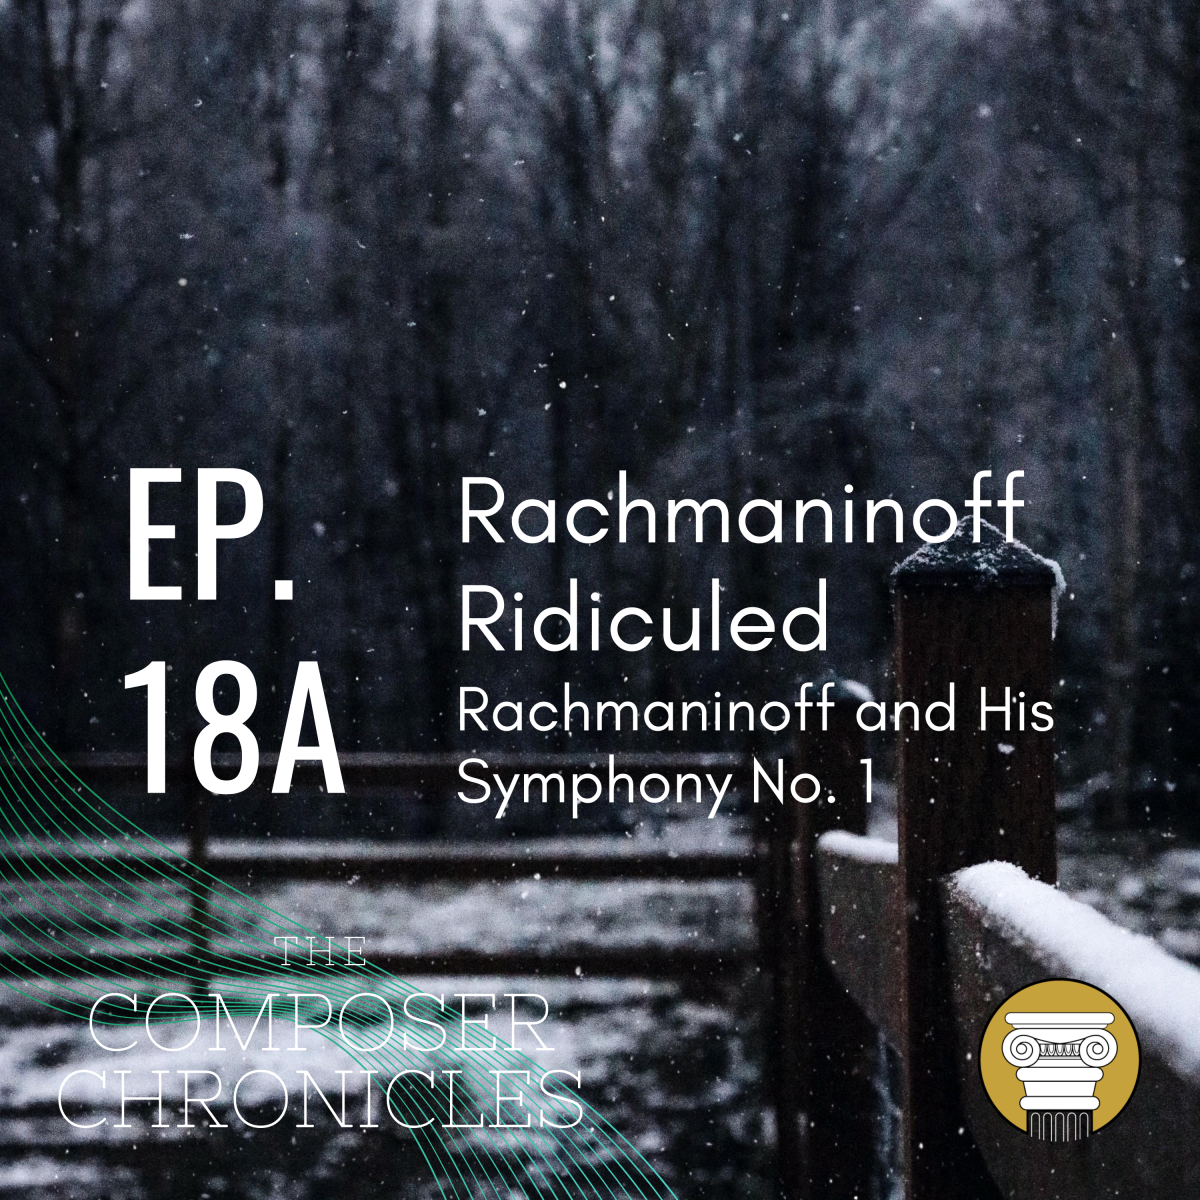 Ep. 18A: Rachmaninoff Ridiculed – Rachmaninoff and His Symphony No. 1